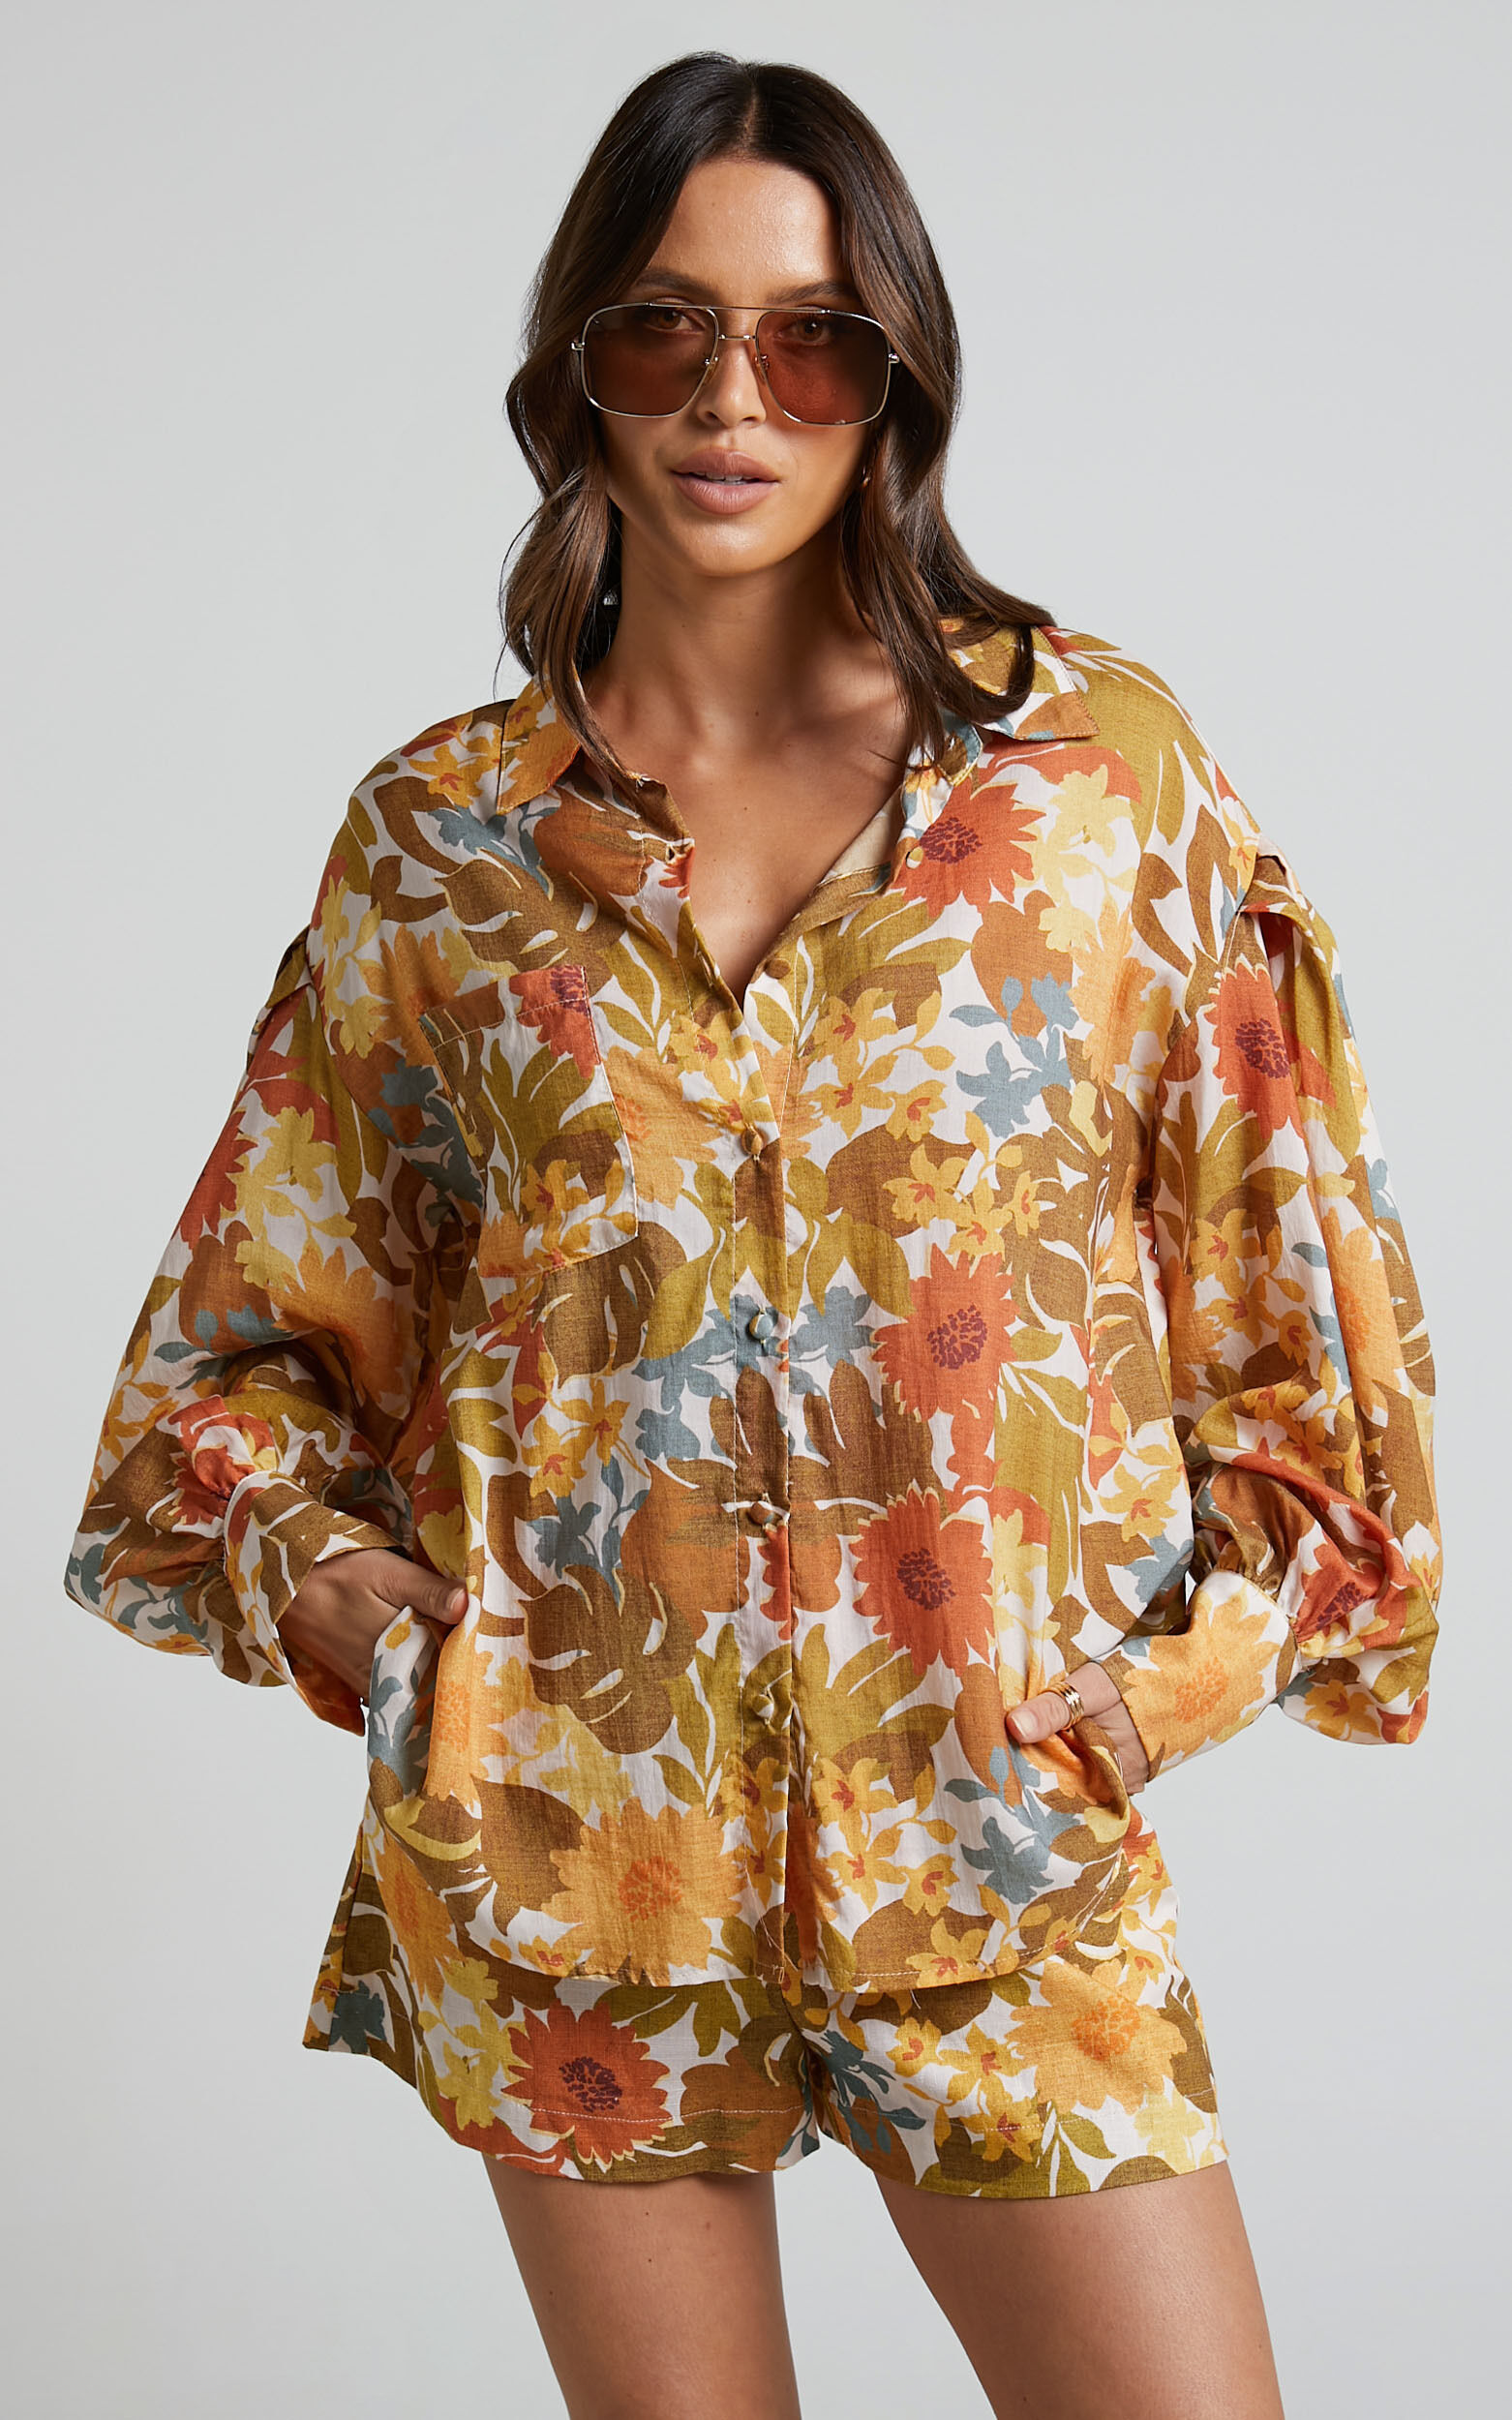 Amalie The Label - Azariah Balloon Sleeve Button Up Shirt in Emerson Floral - 04, ORG1, super-hi-res image number null